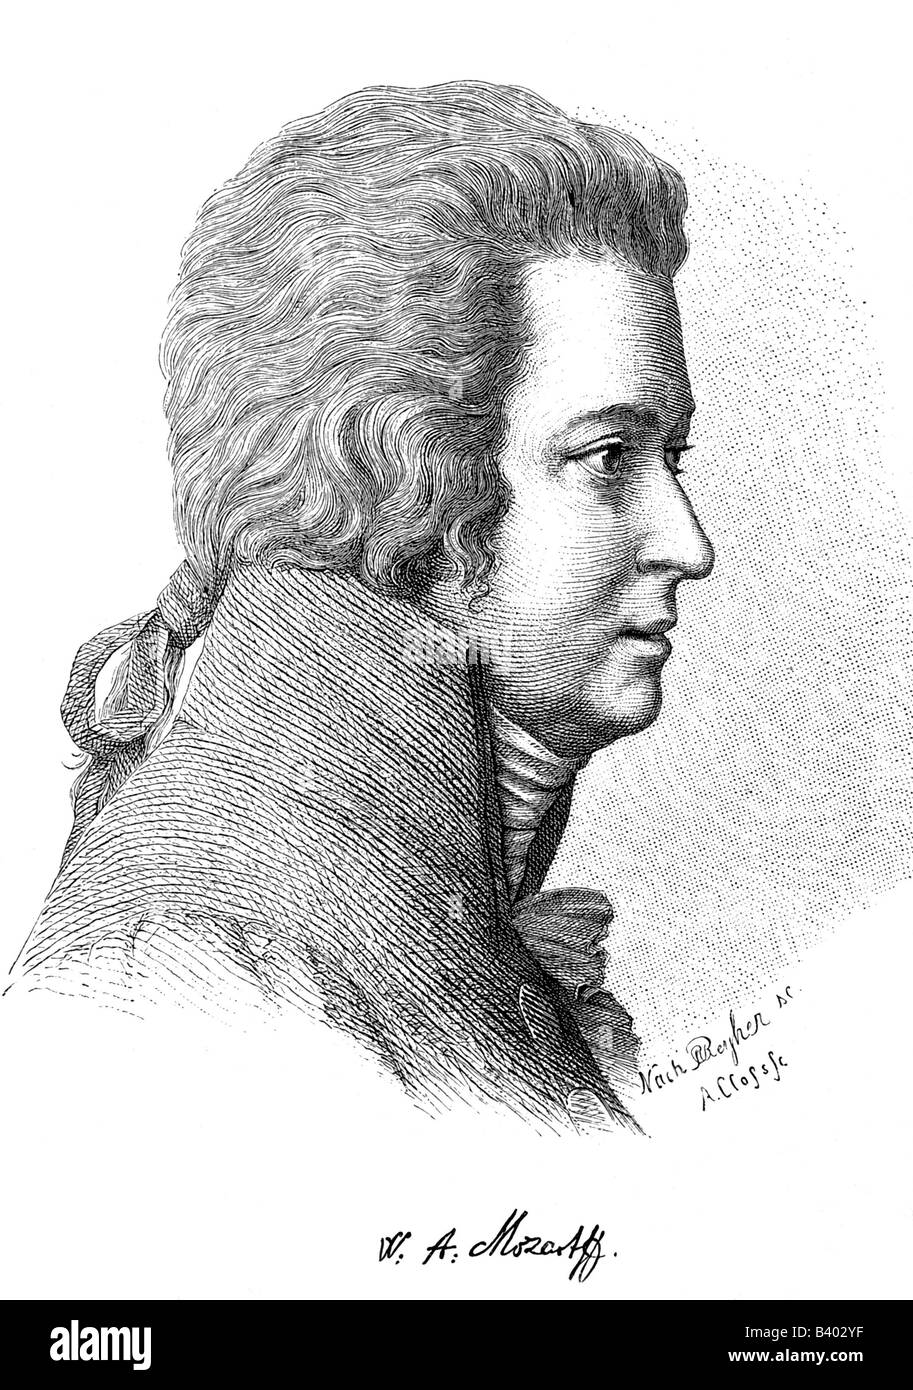 Mozart, Wolfgang Amadeus, 27.1.1756 - 5.12.1791, Austrian composer, portrait, wood engraving by Adolf Closs (1846 - 1894), Stock Photo